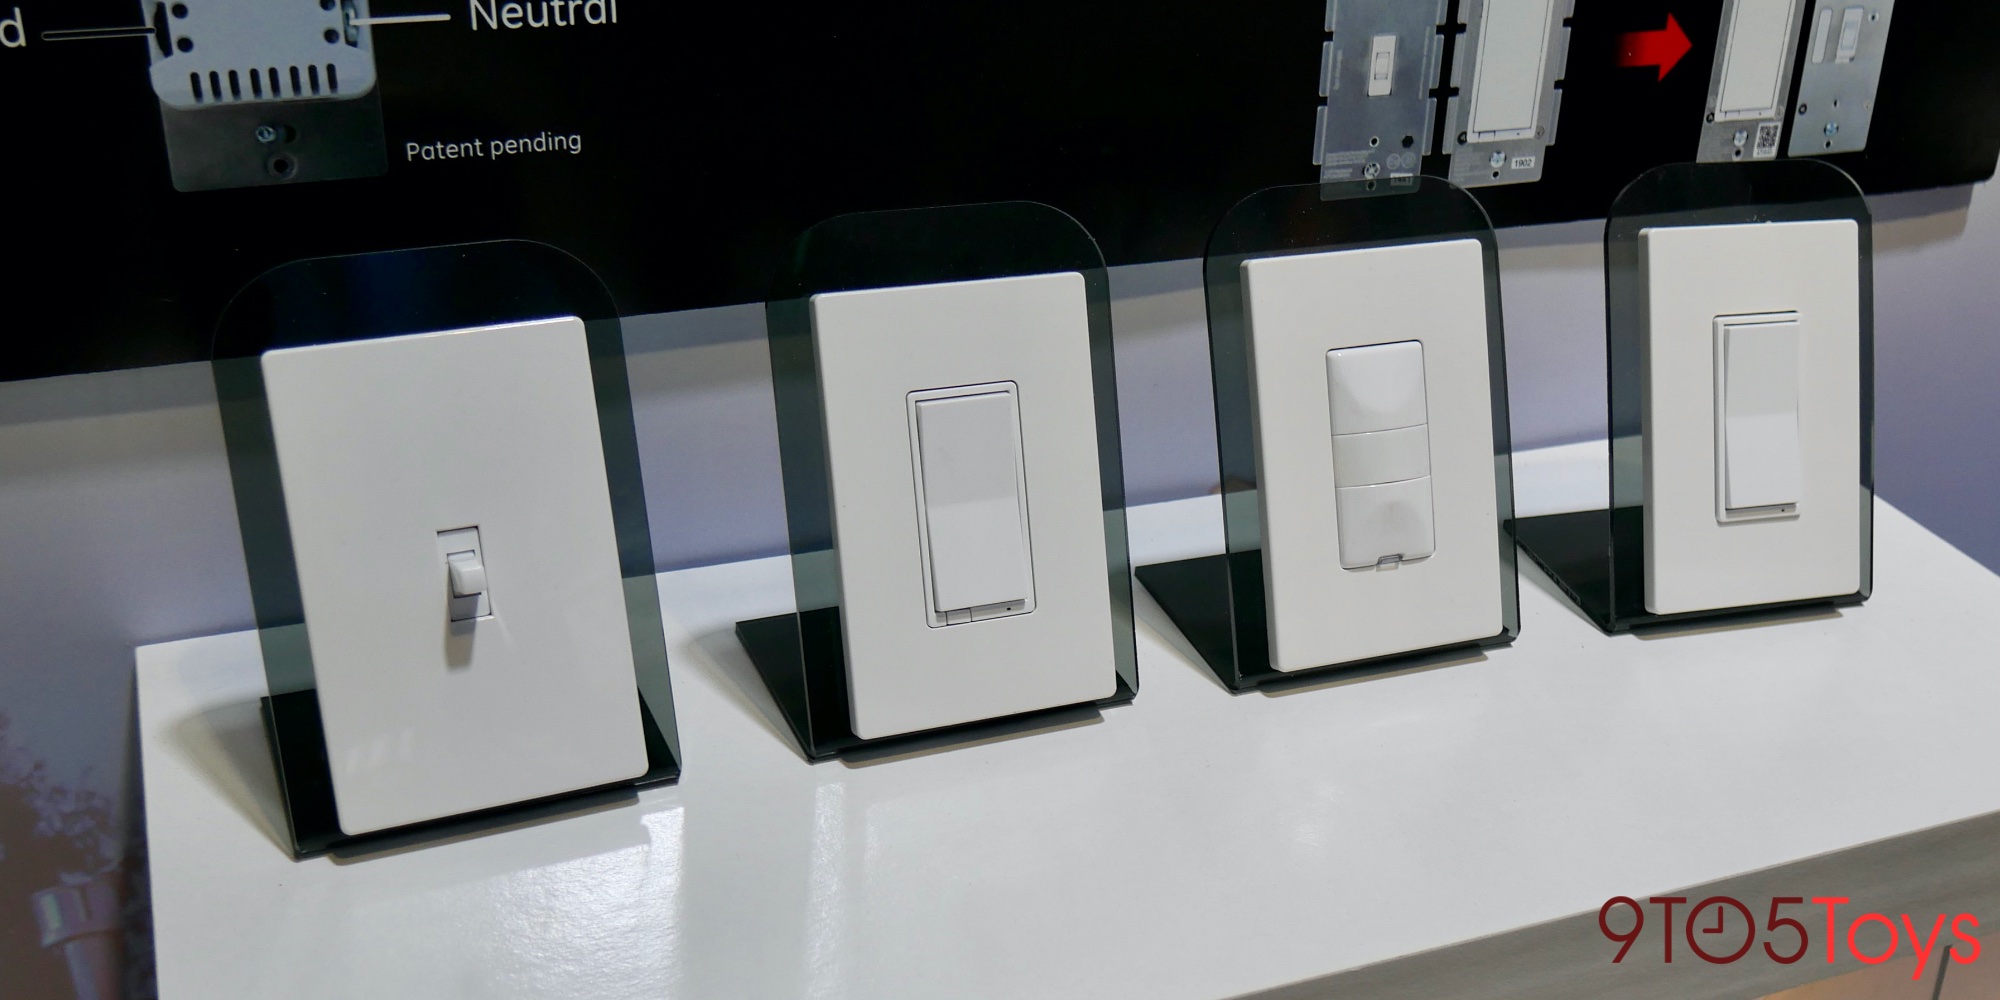 Enbrighten Zigbee Plug-in Smart Switch, Dual Controlled Outlets